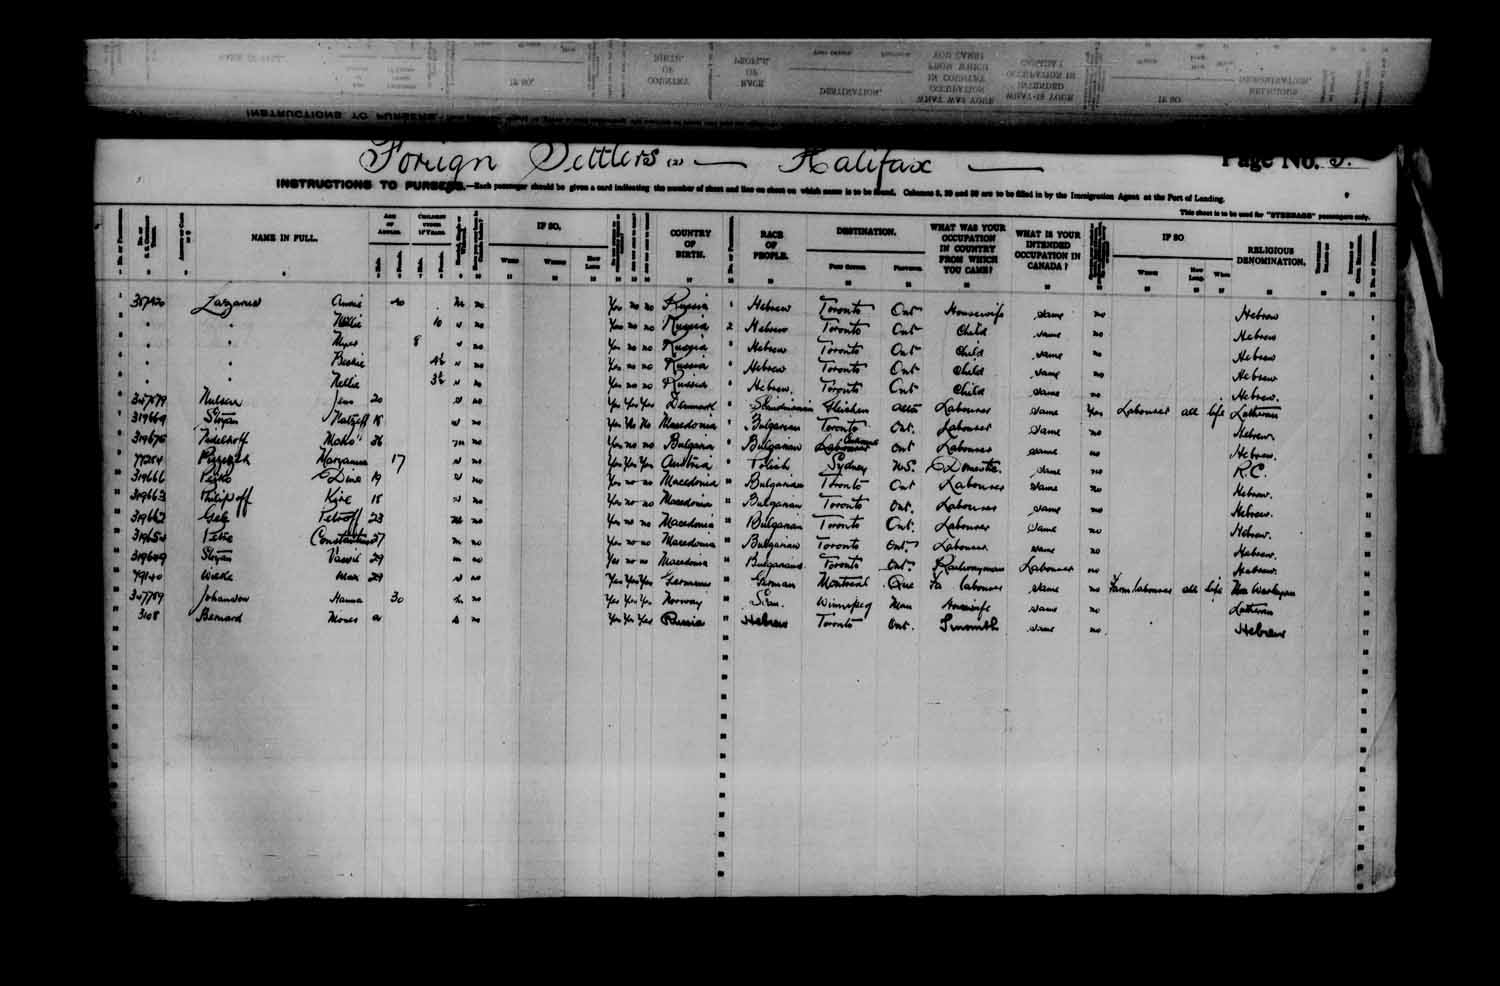 Digitized page of Passenger Lists for Image No.: e003622987